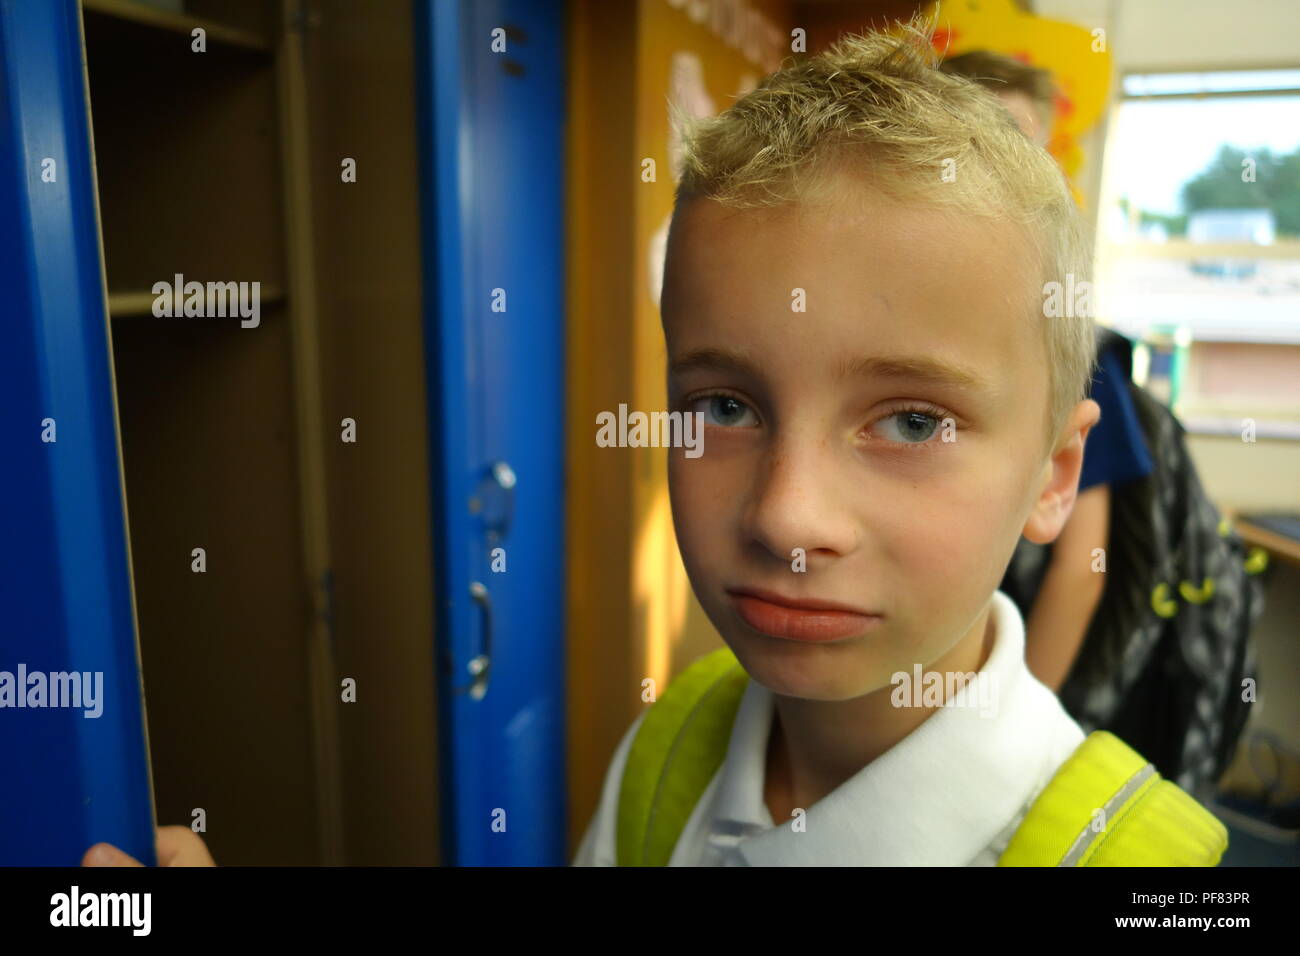 Back to school for elementary aged boy, putting his backpack in his locker Stock Photo